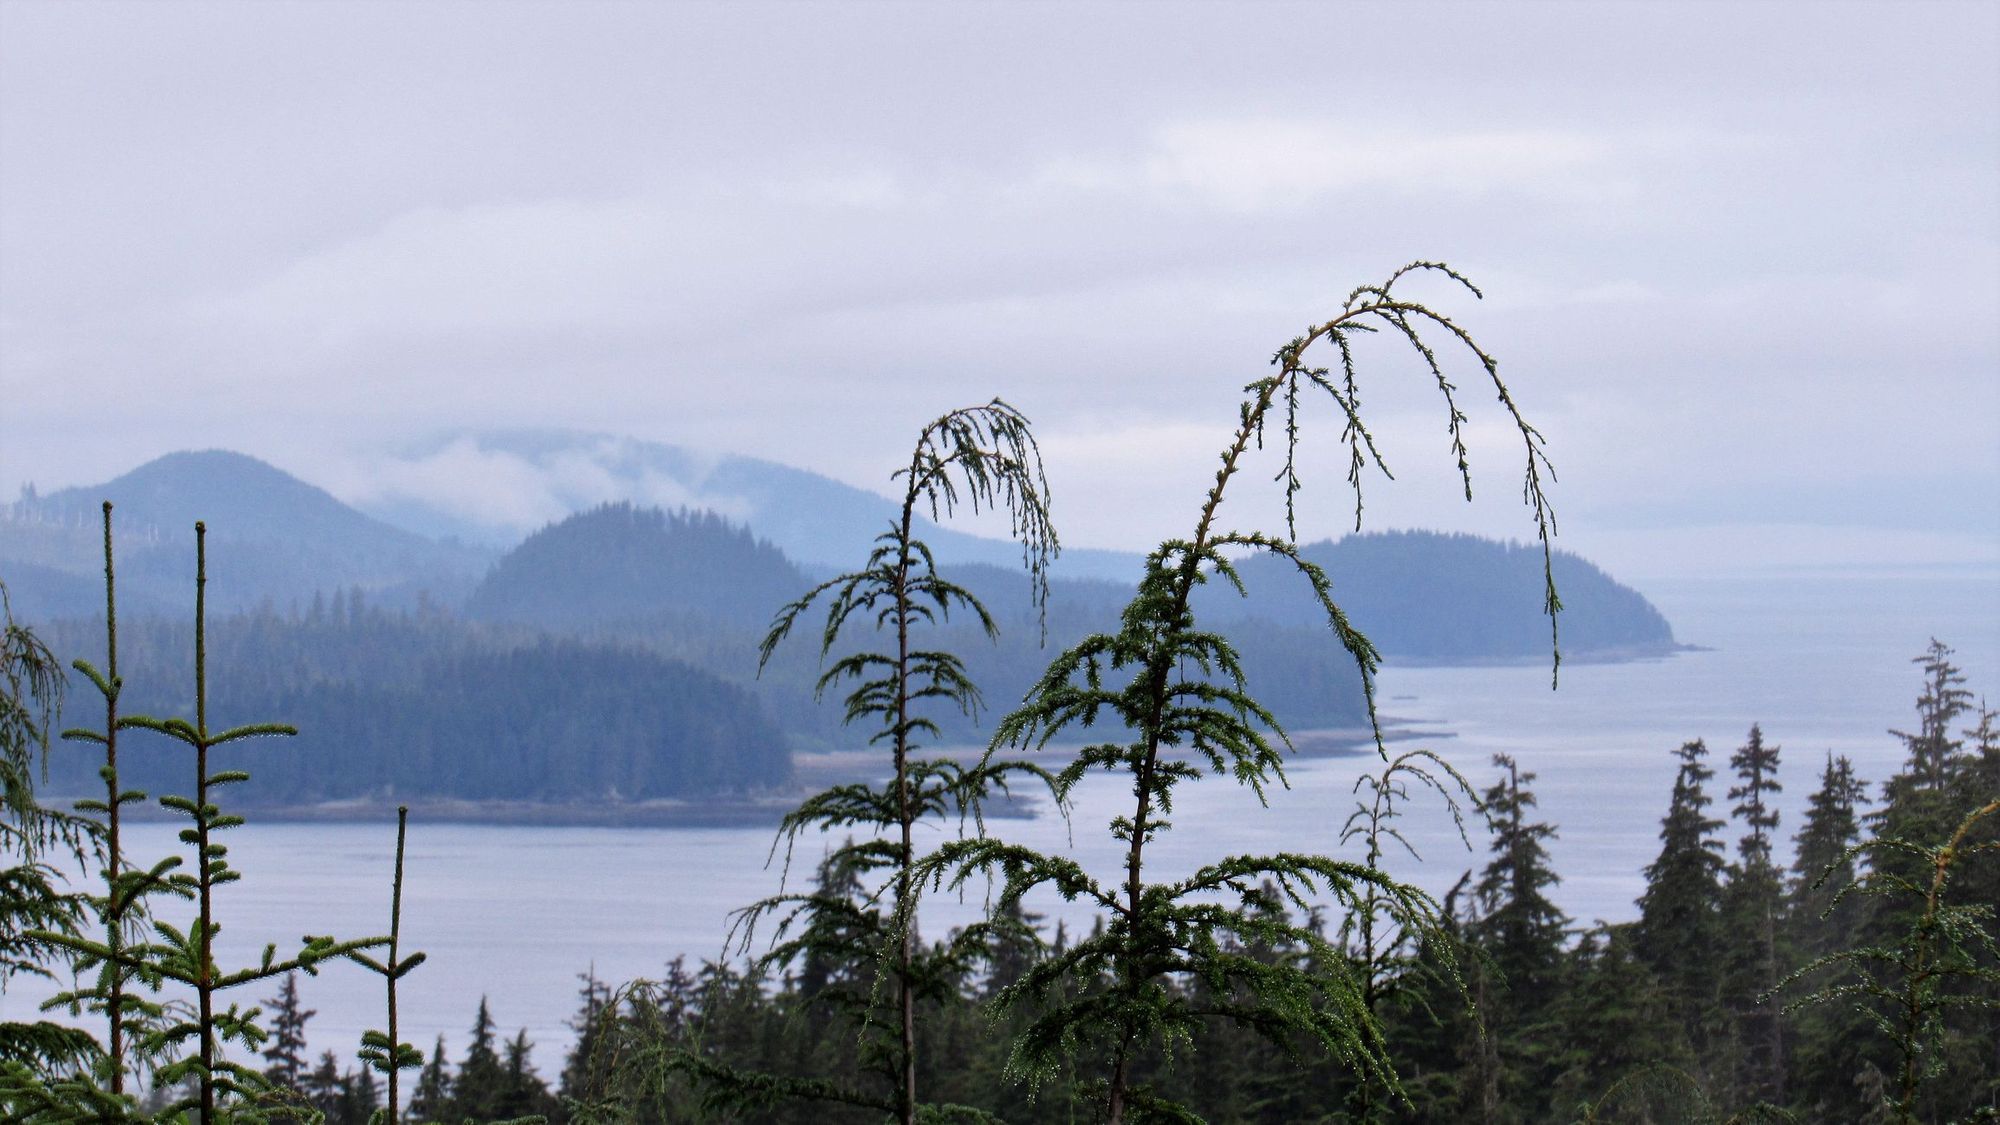 A misty view of Chichagof Island, and Icy Strait, in Alaska